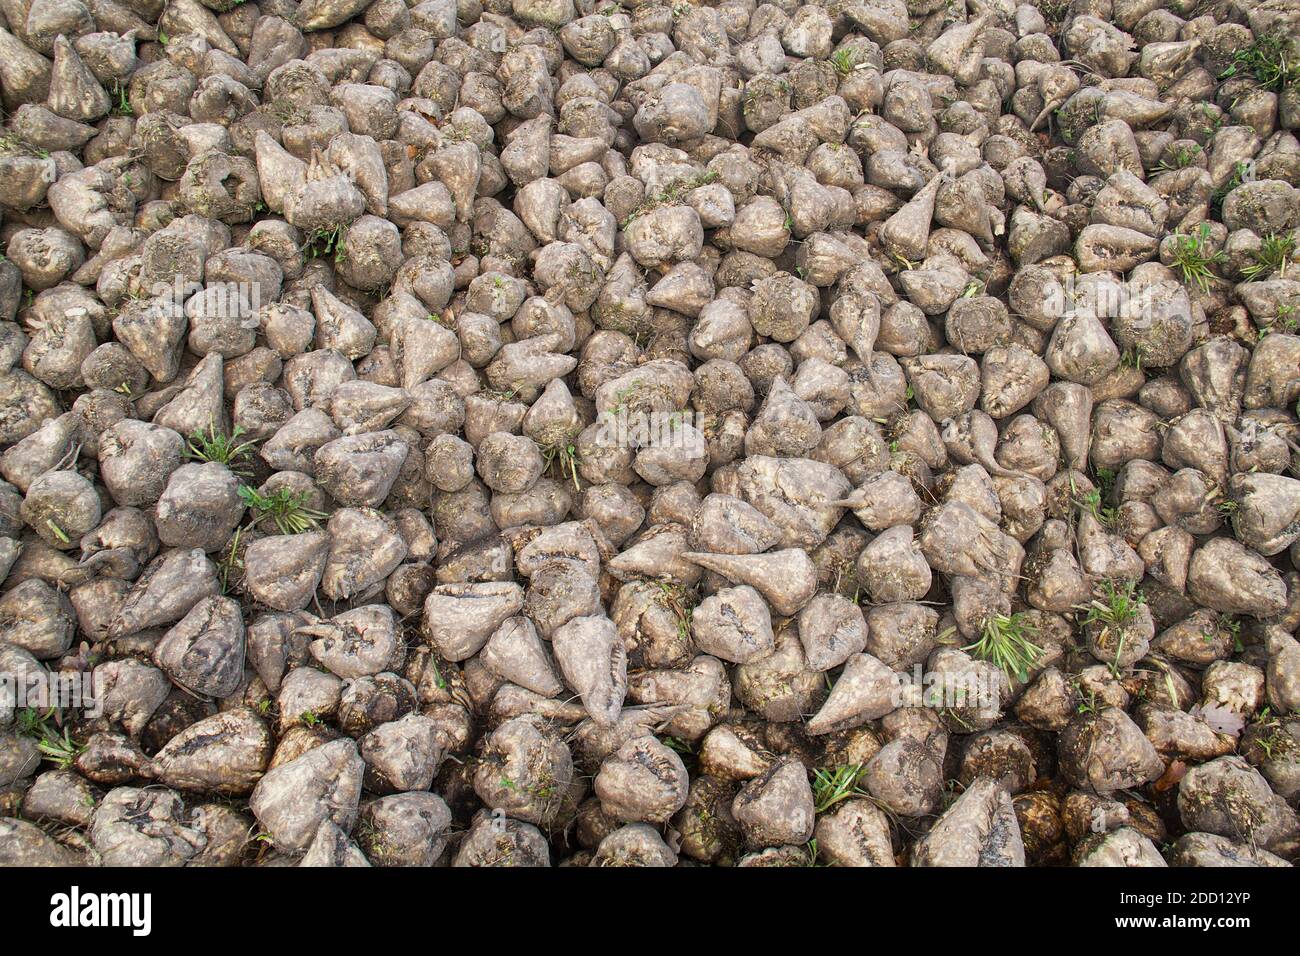 Heap of Sugar beet in autumn after harvest Stock Photo